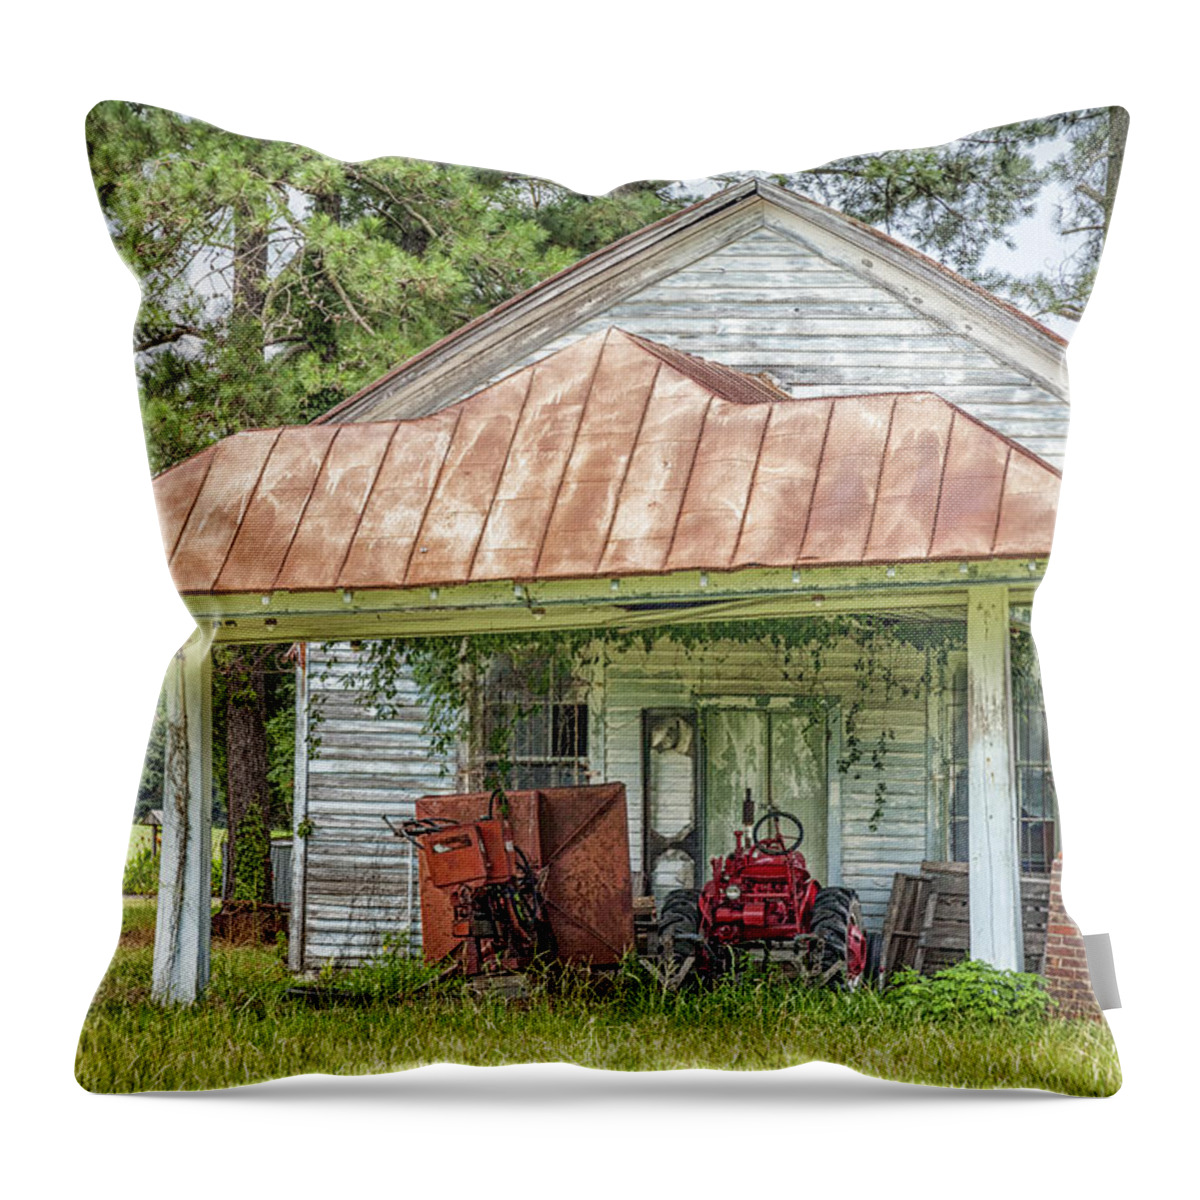 Abandoned Throw Pillow featuring the photograph N.C. Tractor Shed - Photography by Jo Ann Tomaselli by Jo Ann Tomaselli